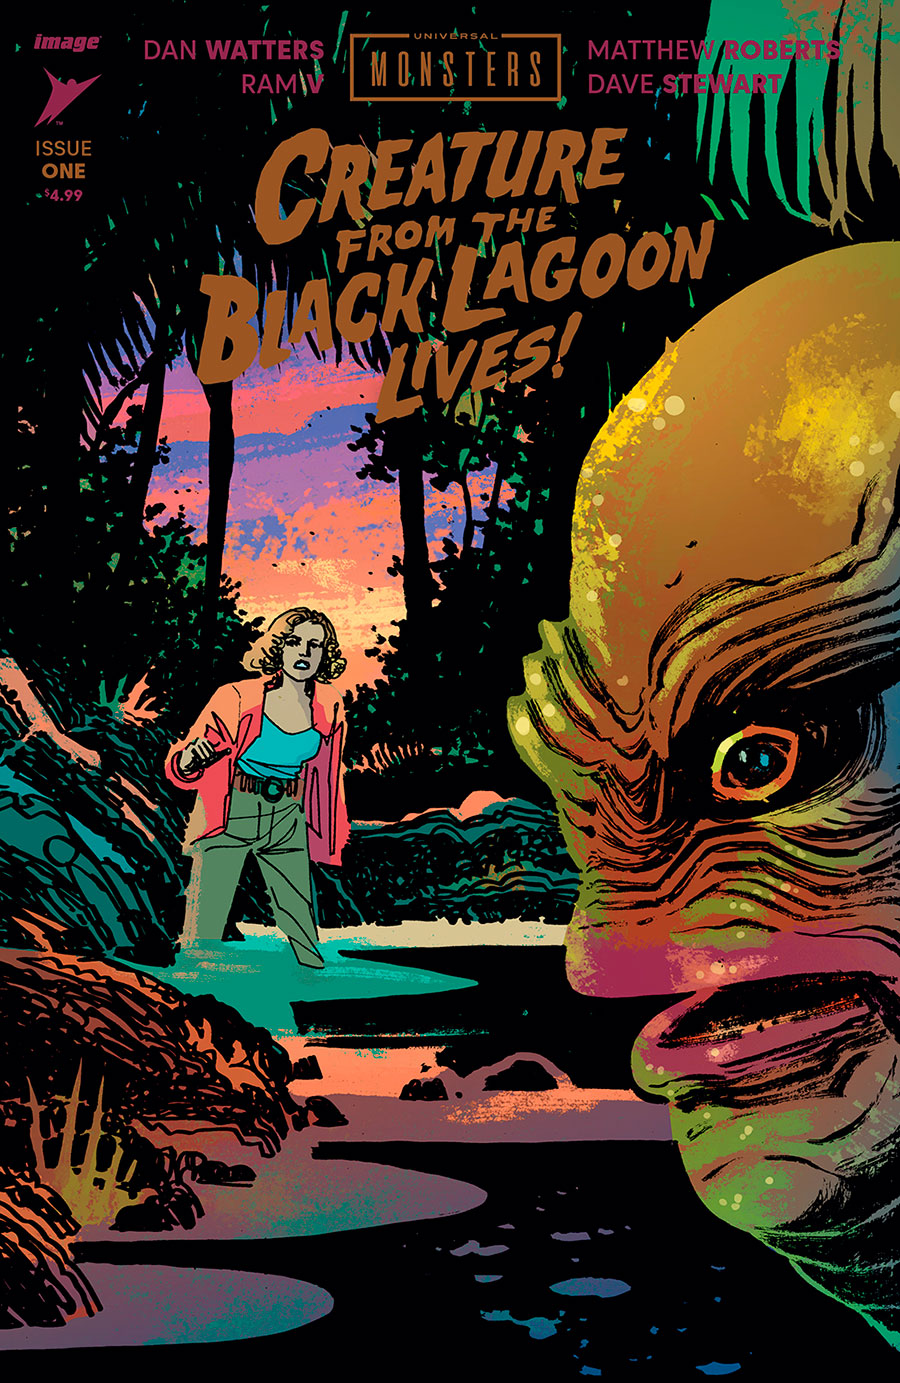 Universal Monsters Creature From The Black Lagoon Lives #1 Cover C Incentive DANI Connecting Variant Cover